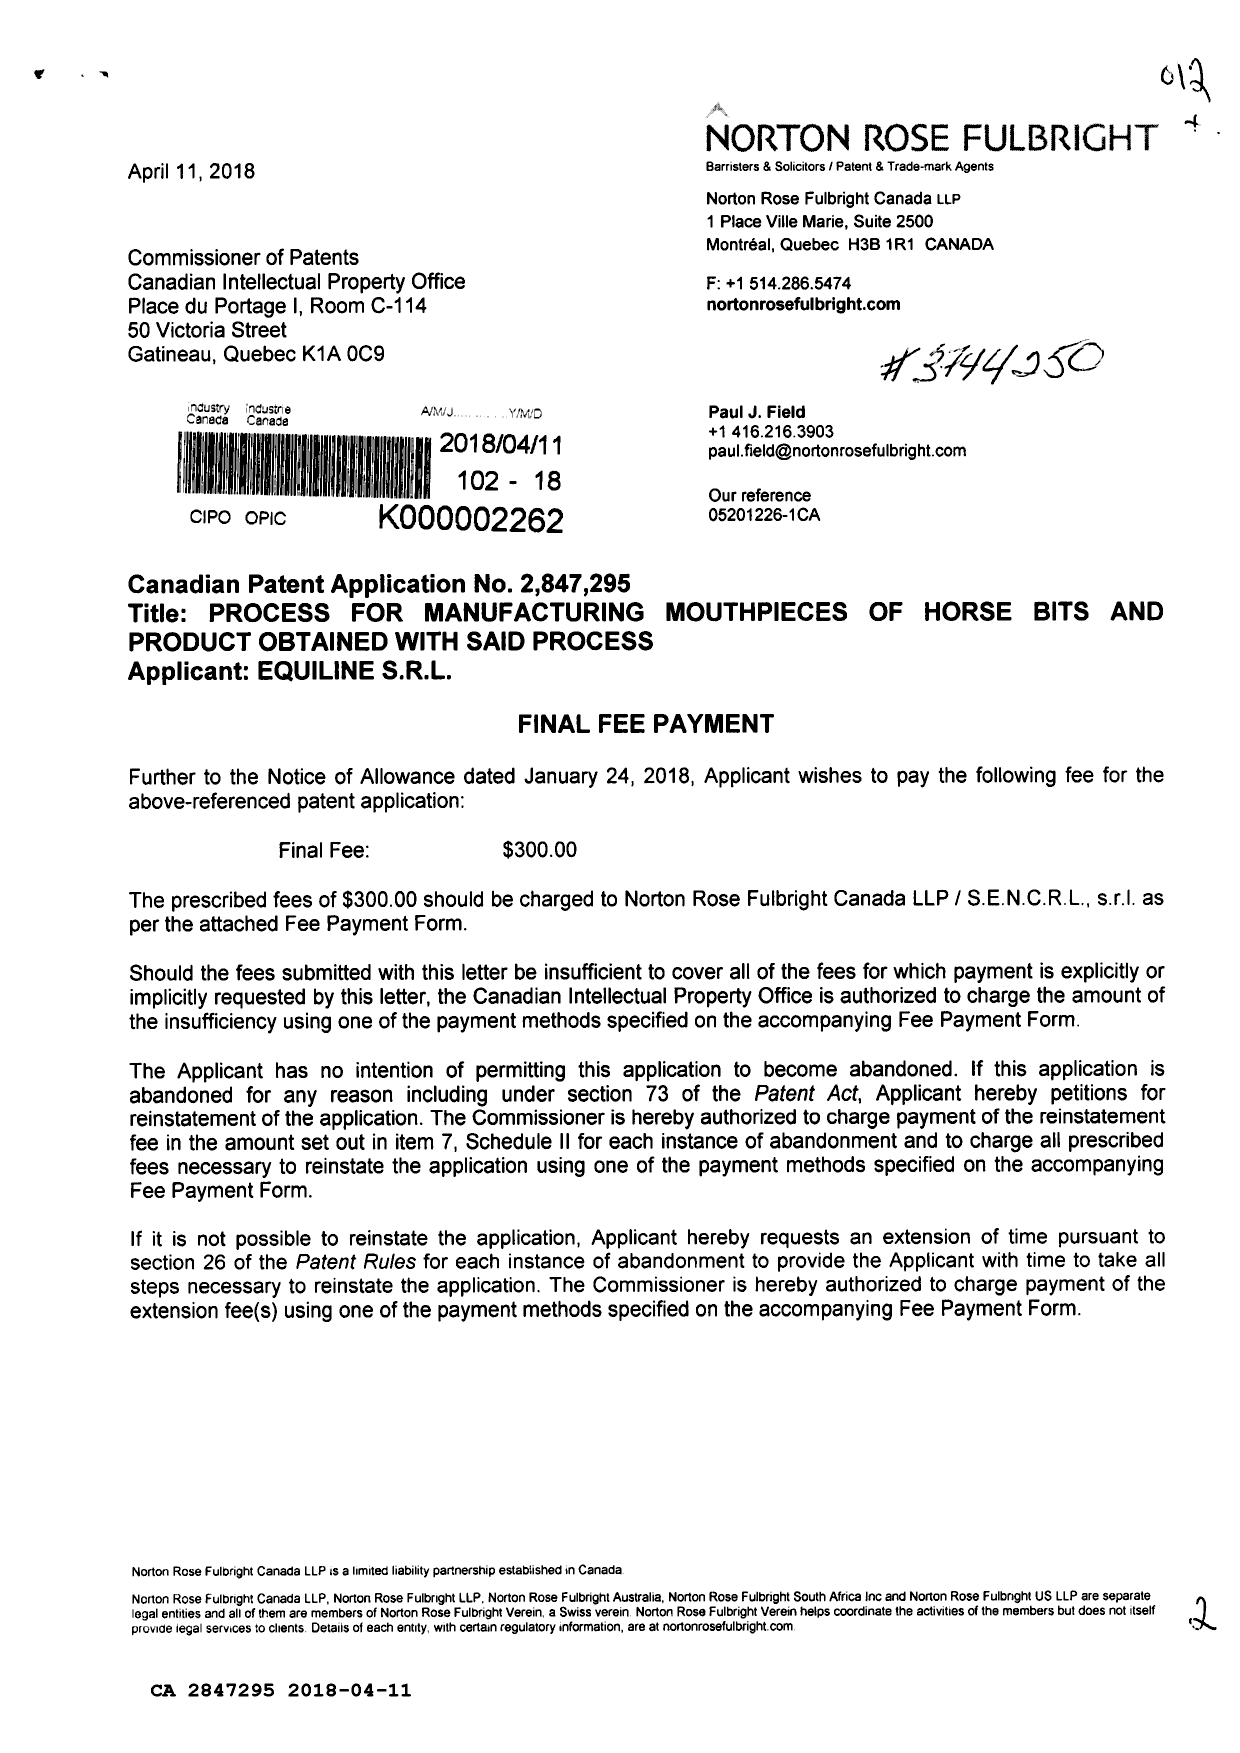 Canadian Patent Document 2847295. Final Fee 20180411. Image 1 of 2